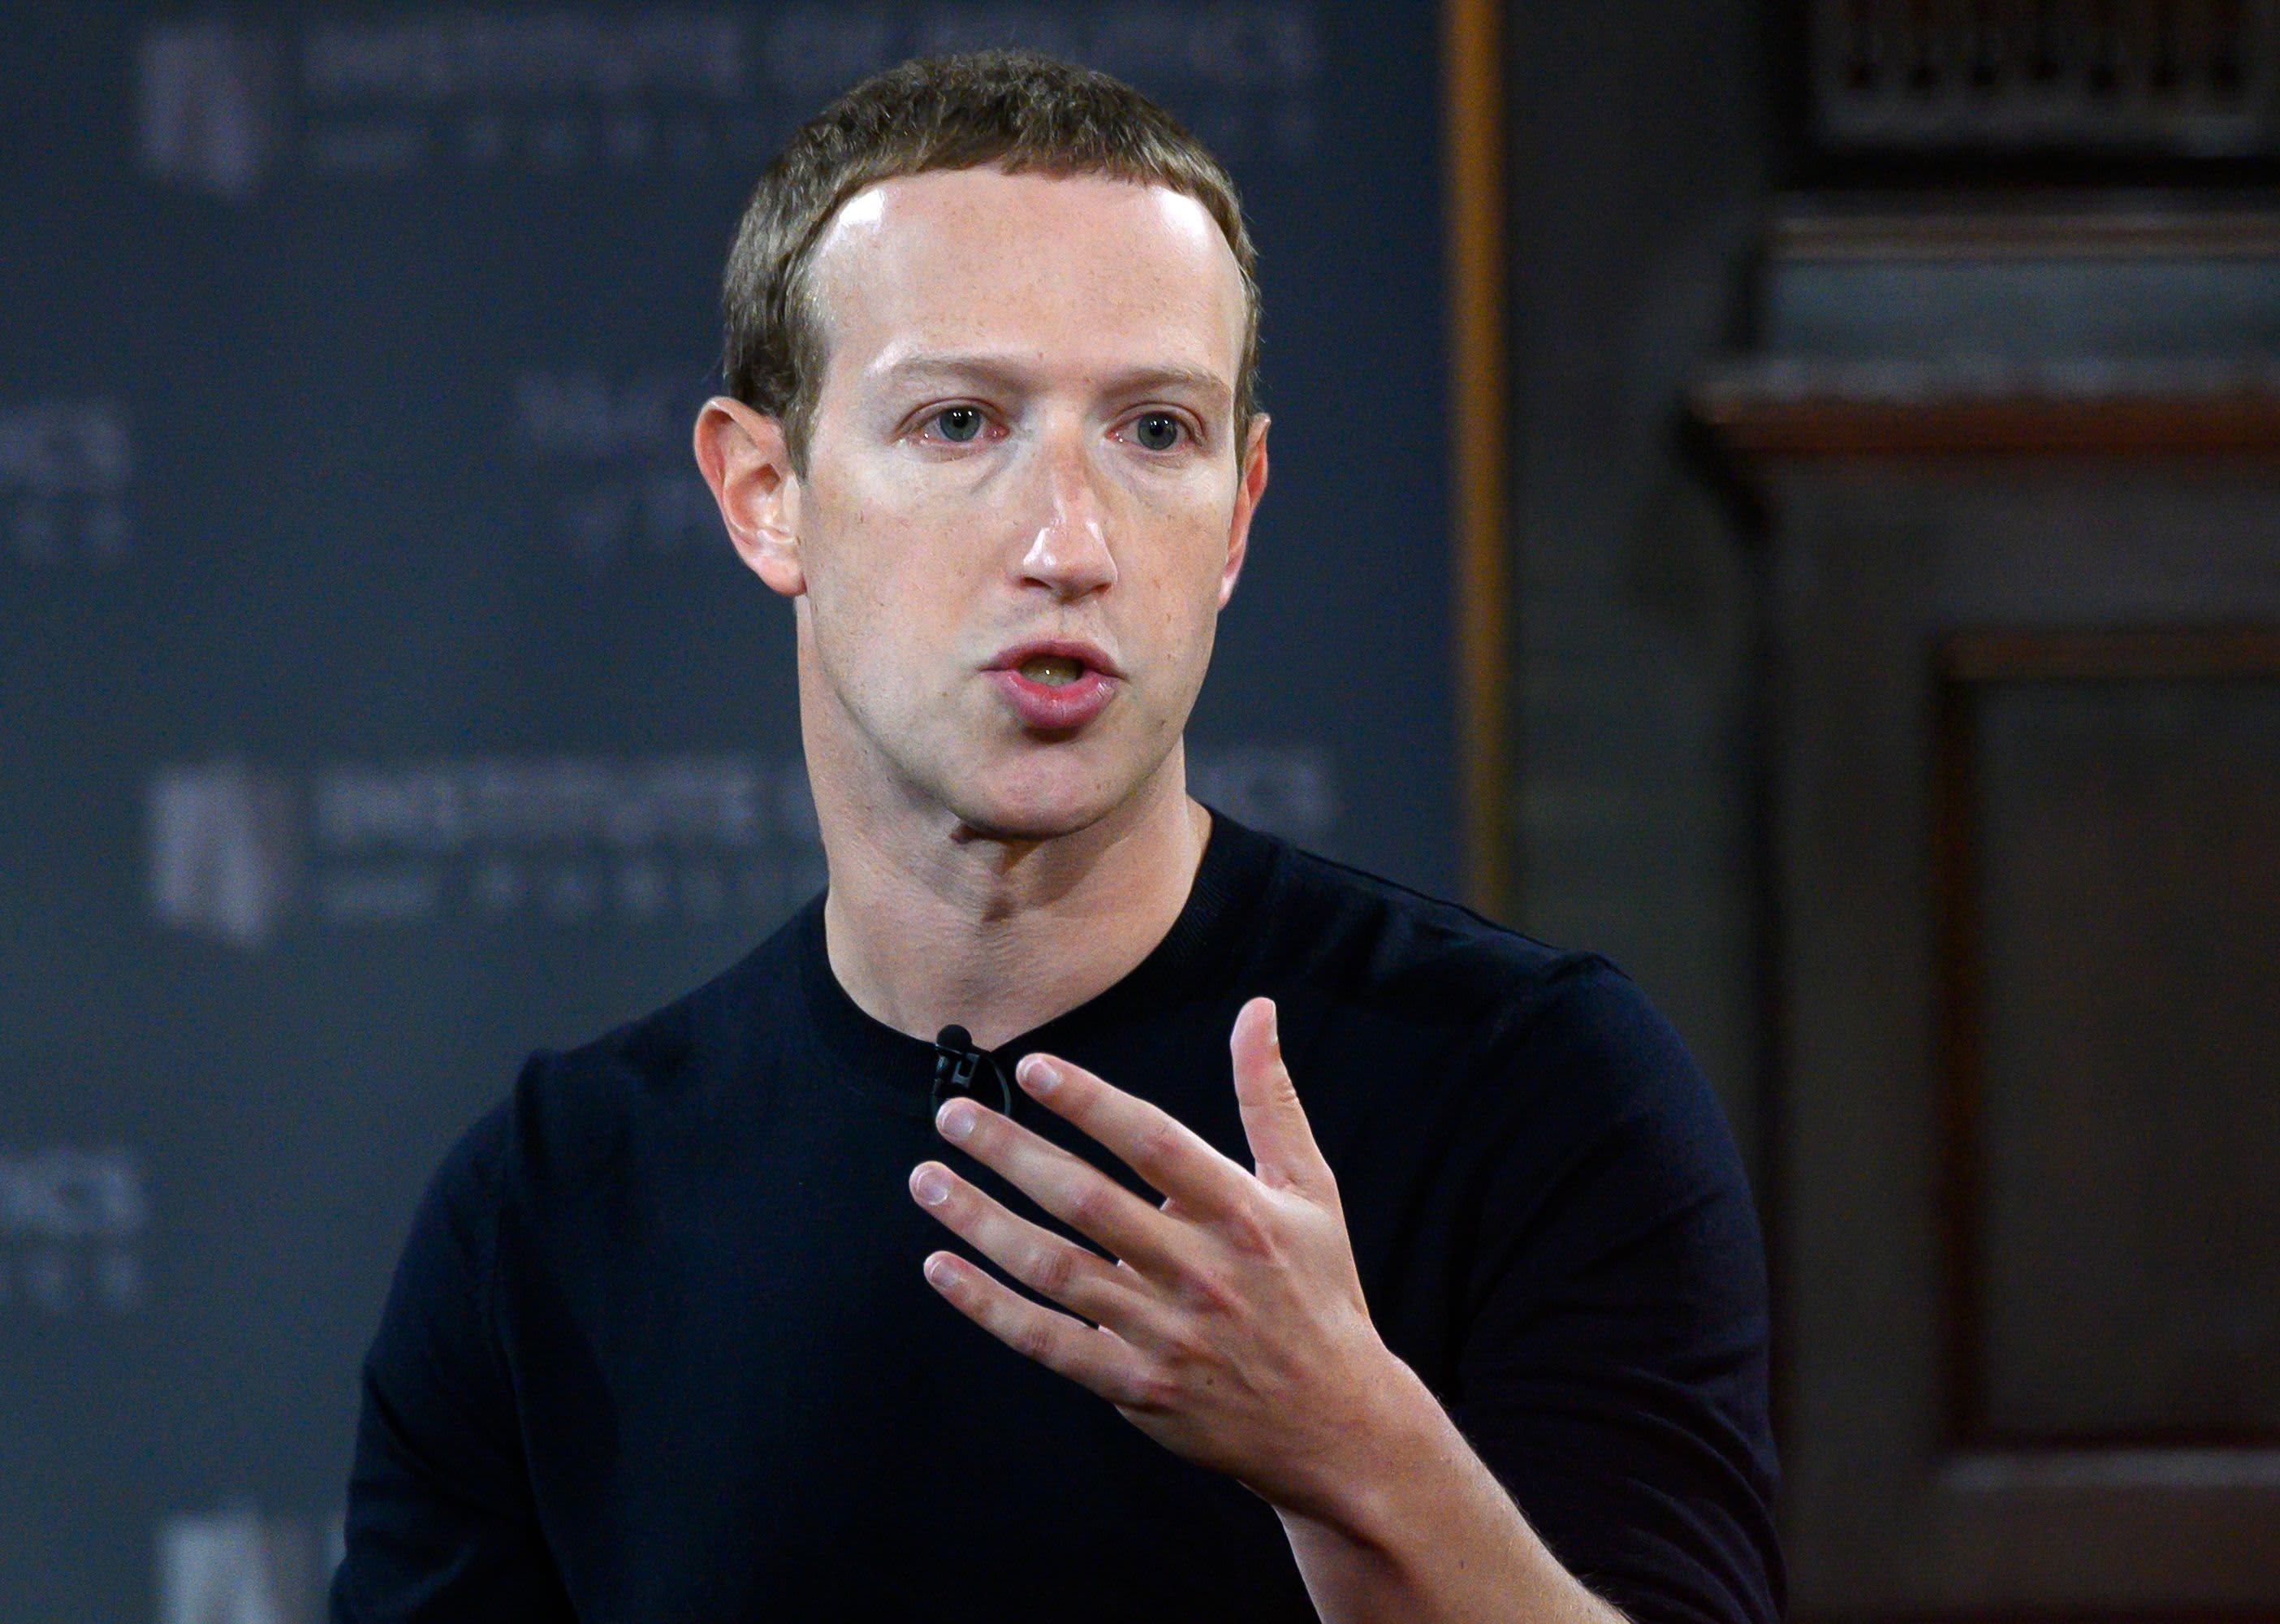 Facebook to invest $ 1 billion in news over the next three years